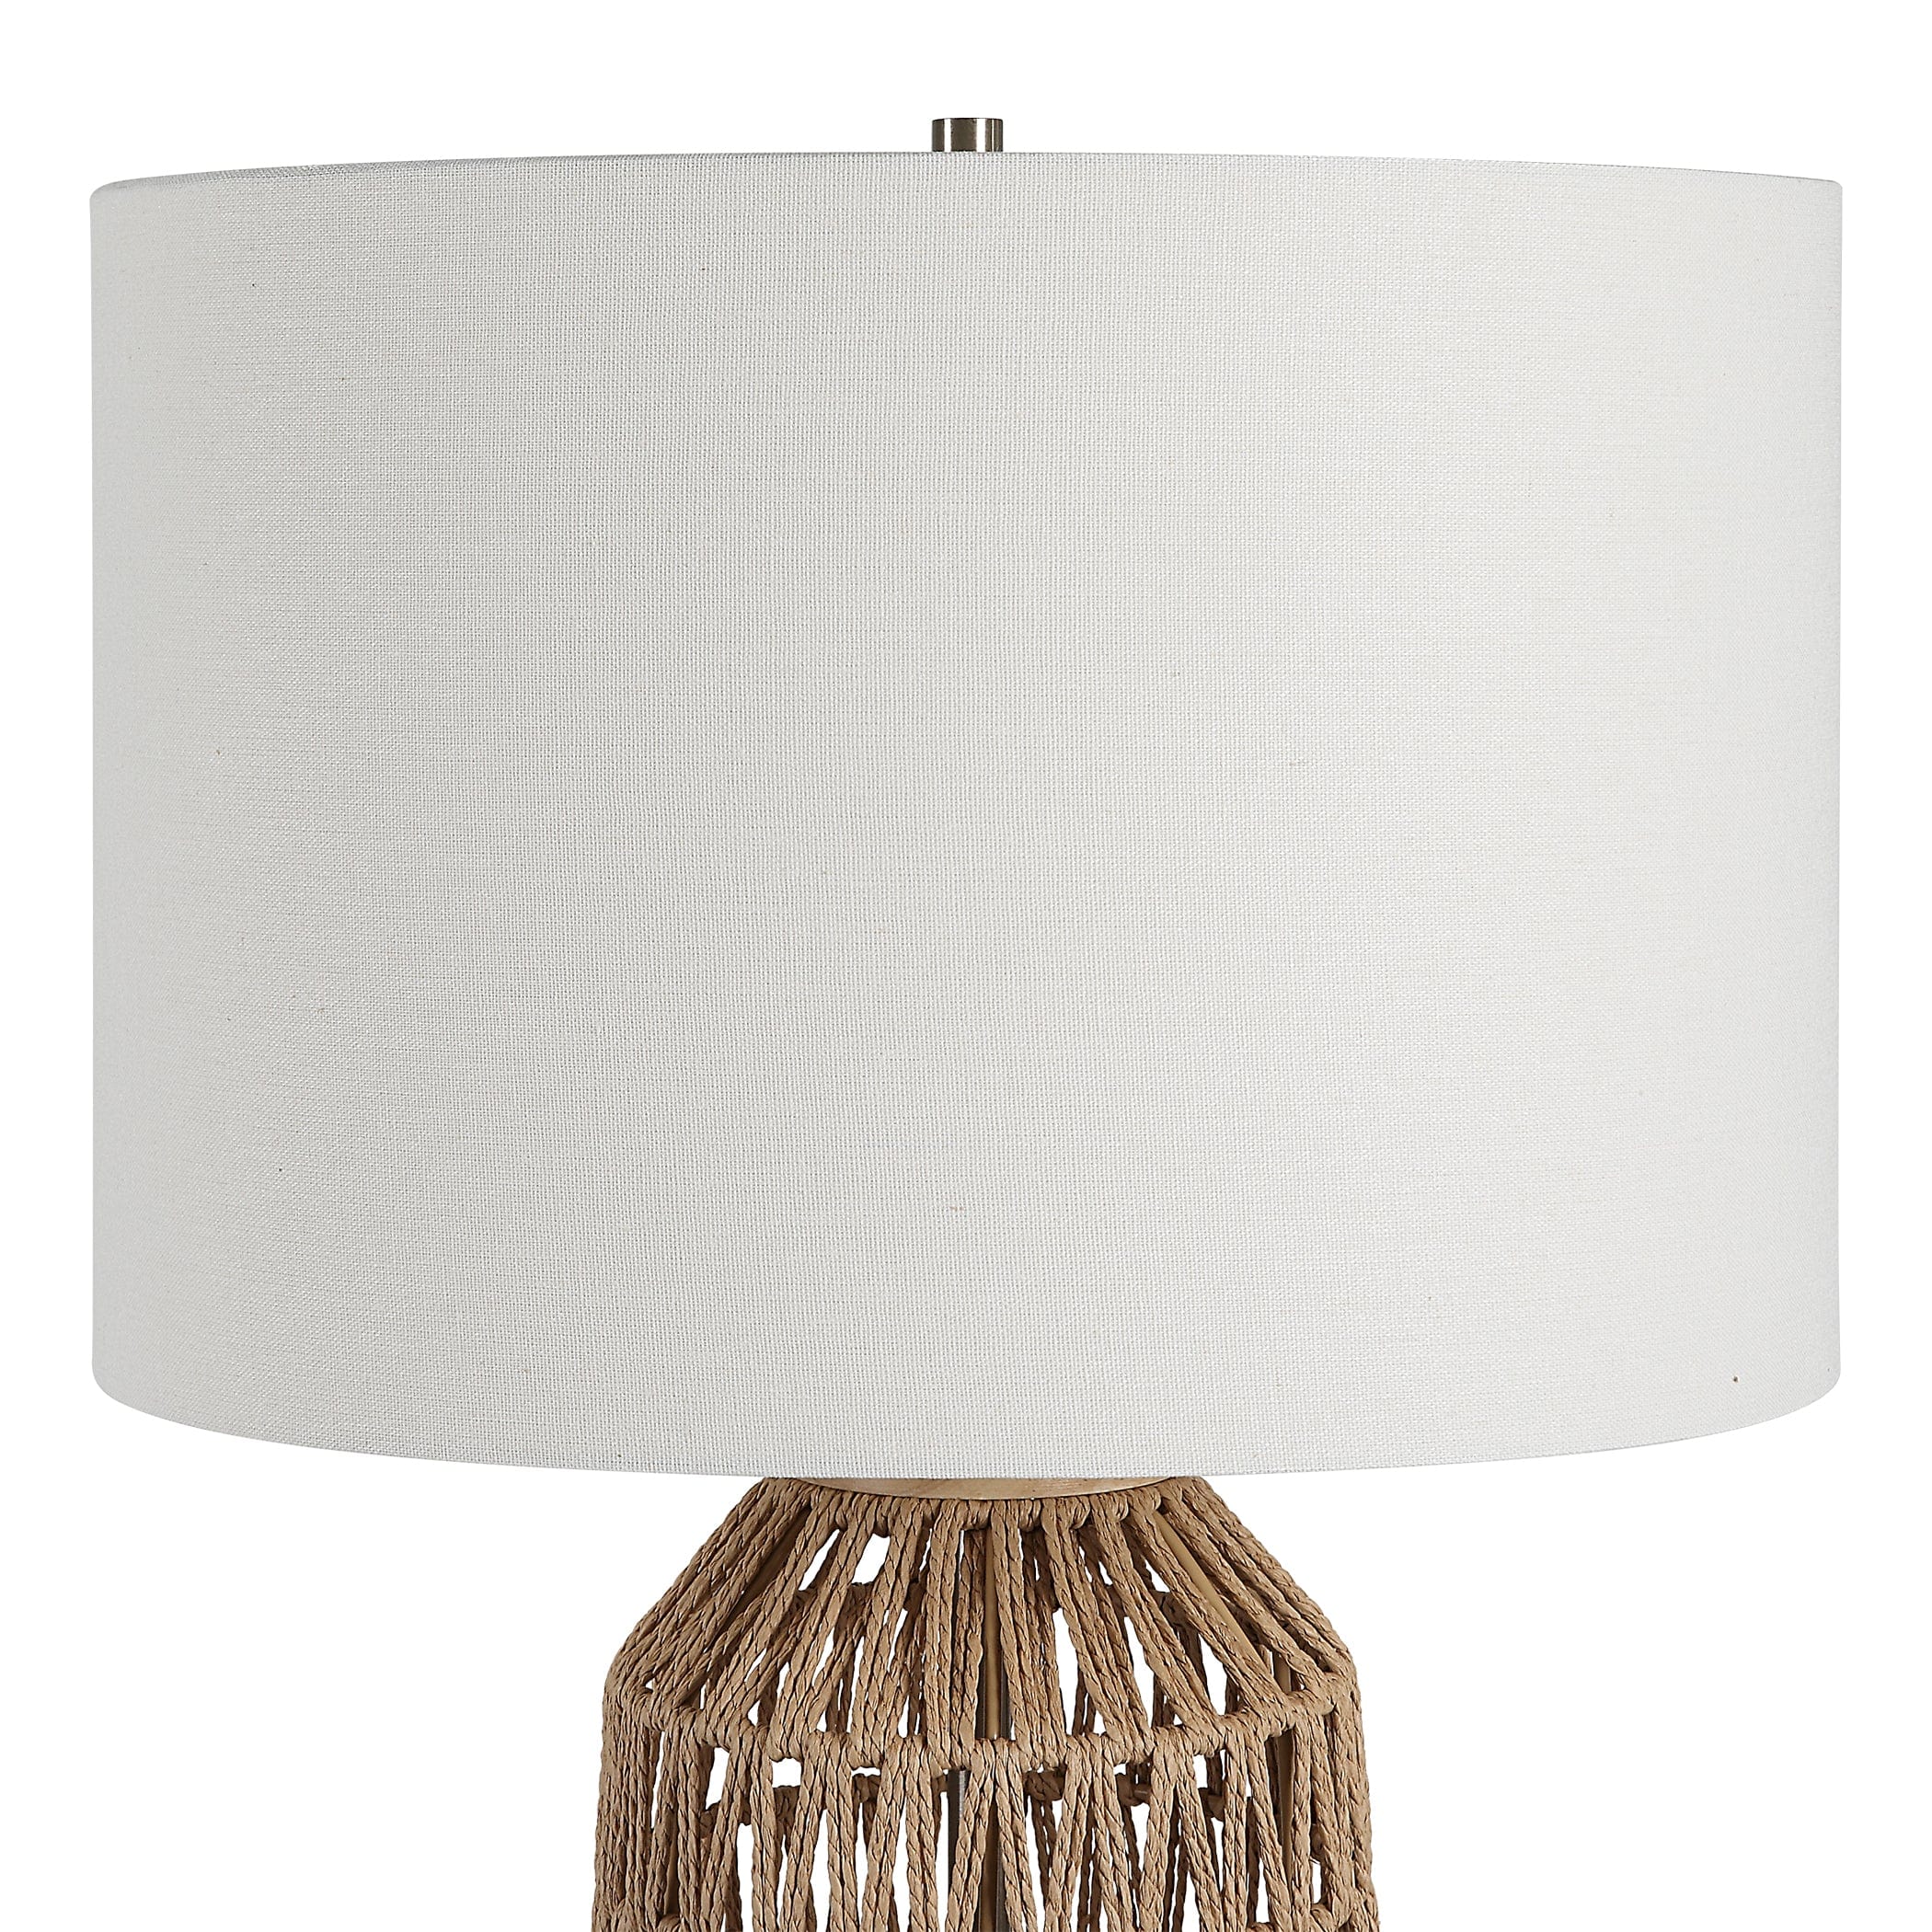 TABLE LAMP-W26130-1 Uttermost